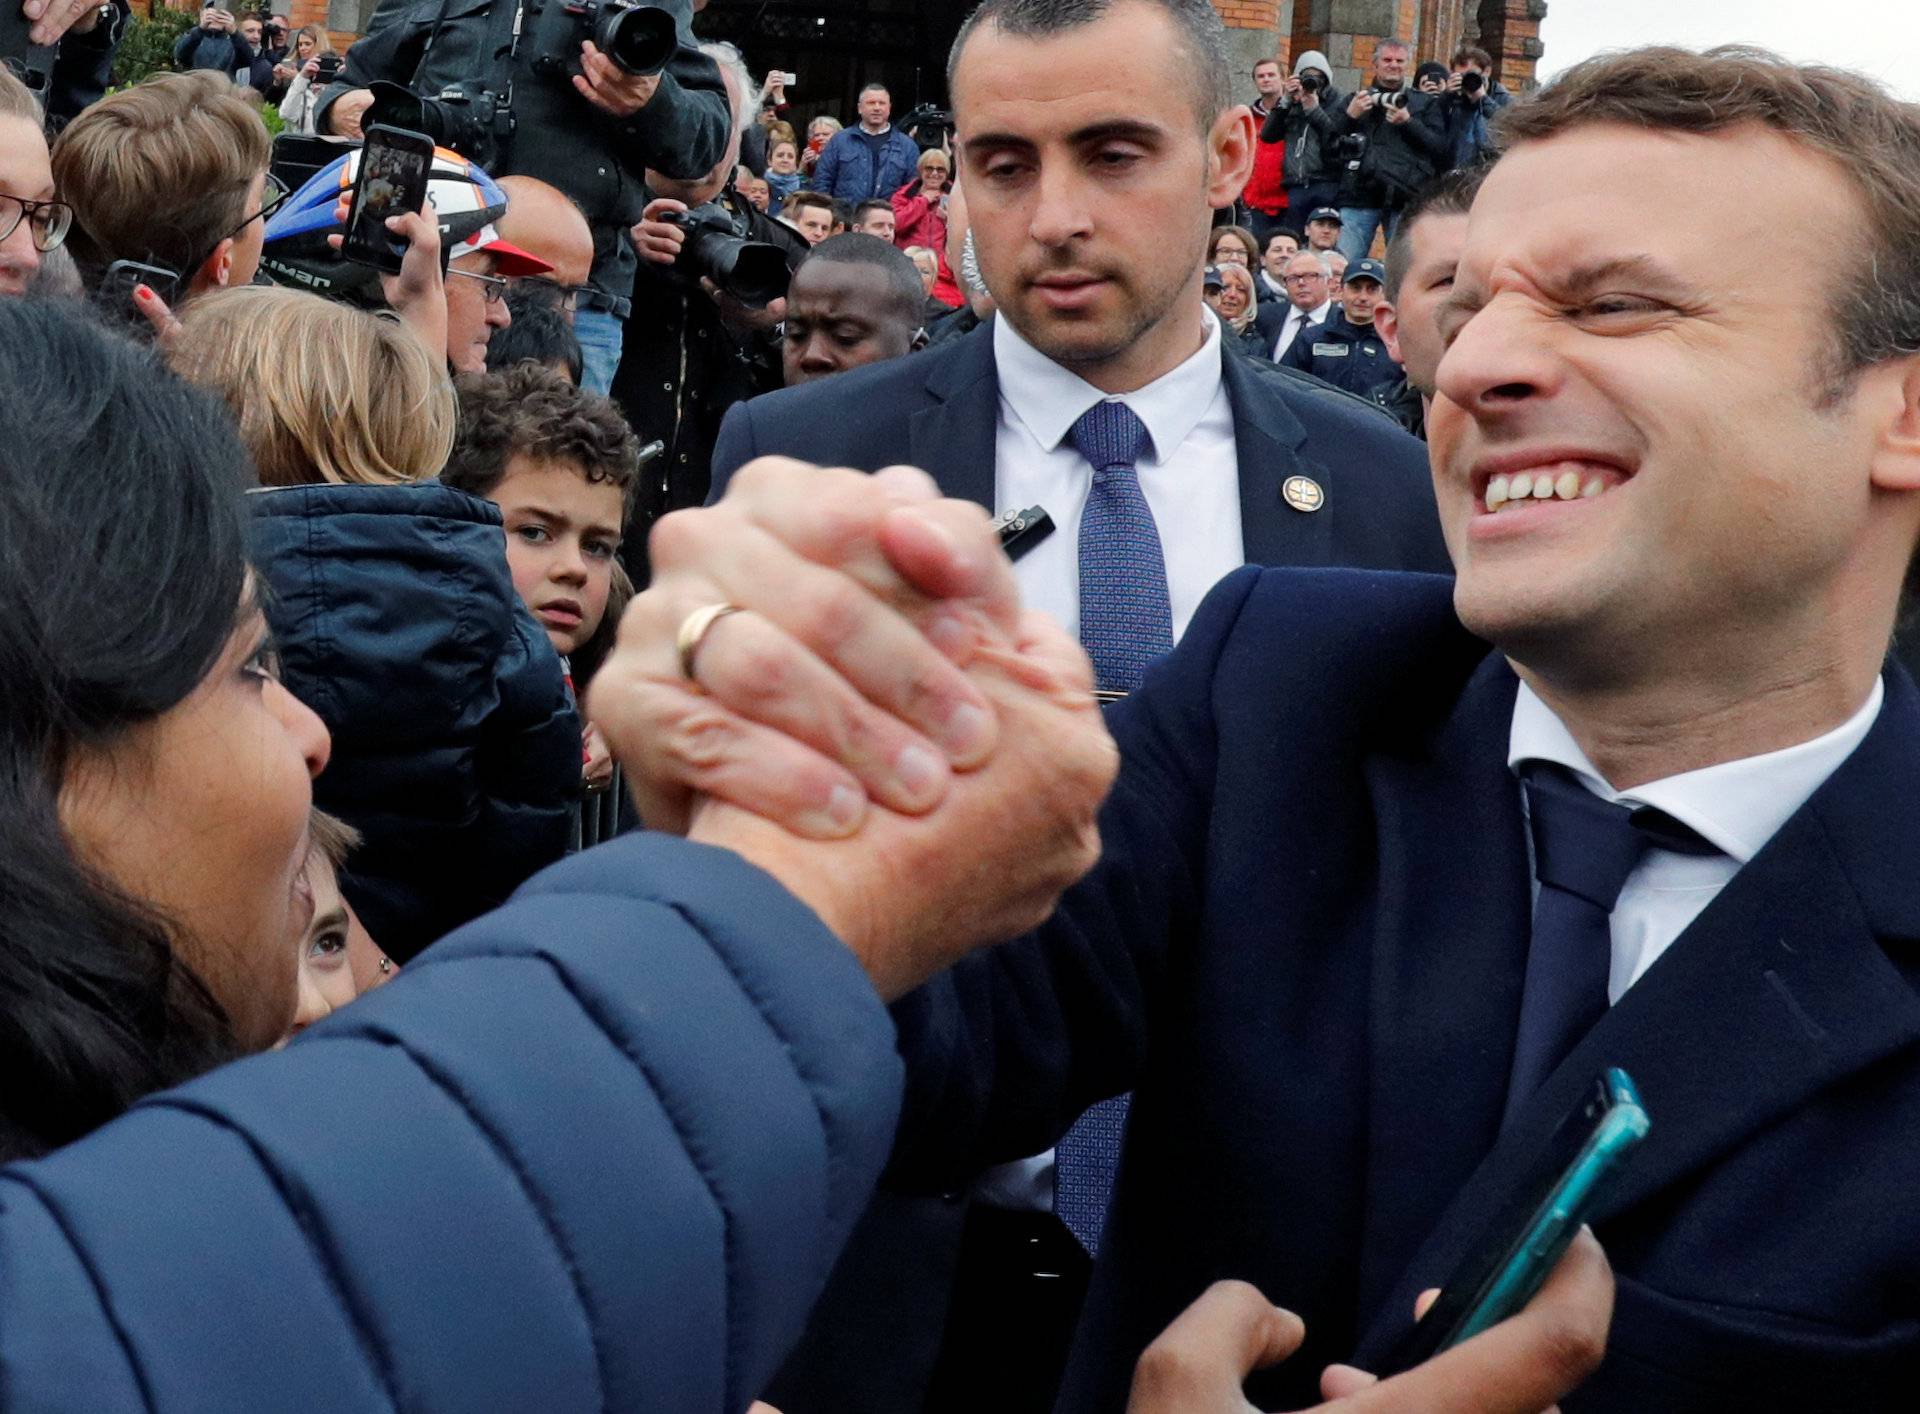 French presidential election candidate Emmanuel Macron greets supporters as leaves a polling station during the the second round of 2017 French presidential election, in Le Touquet